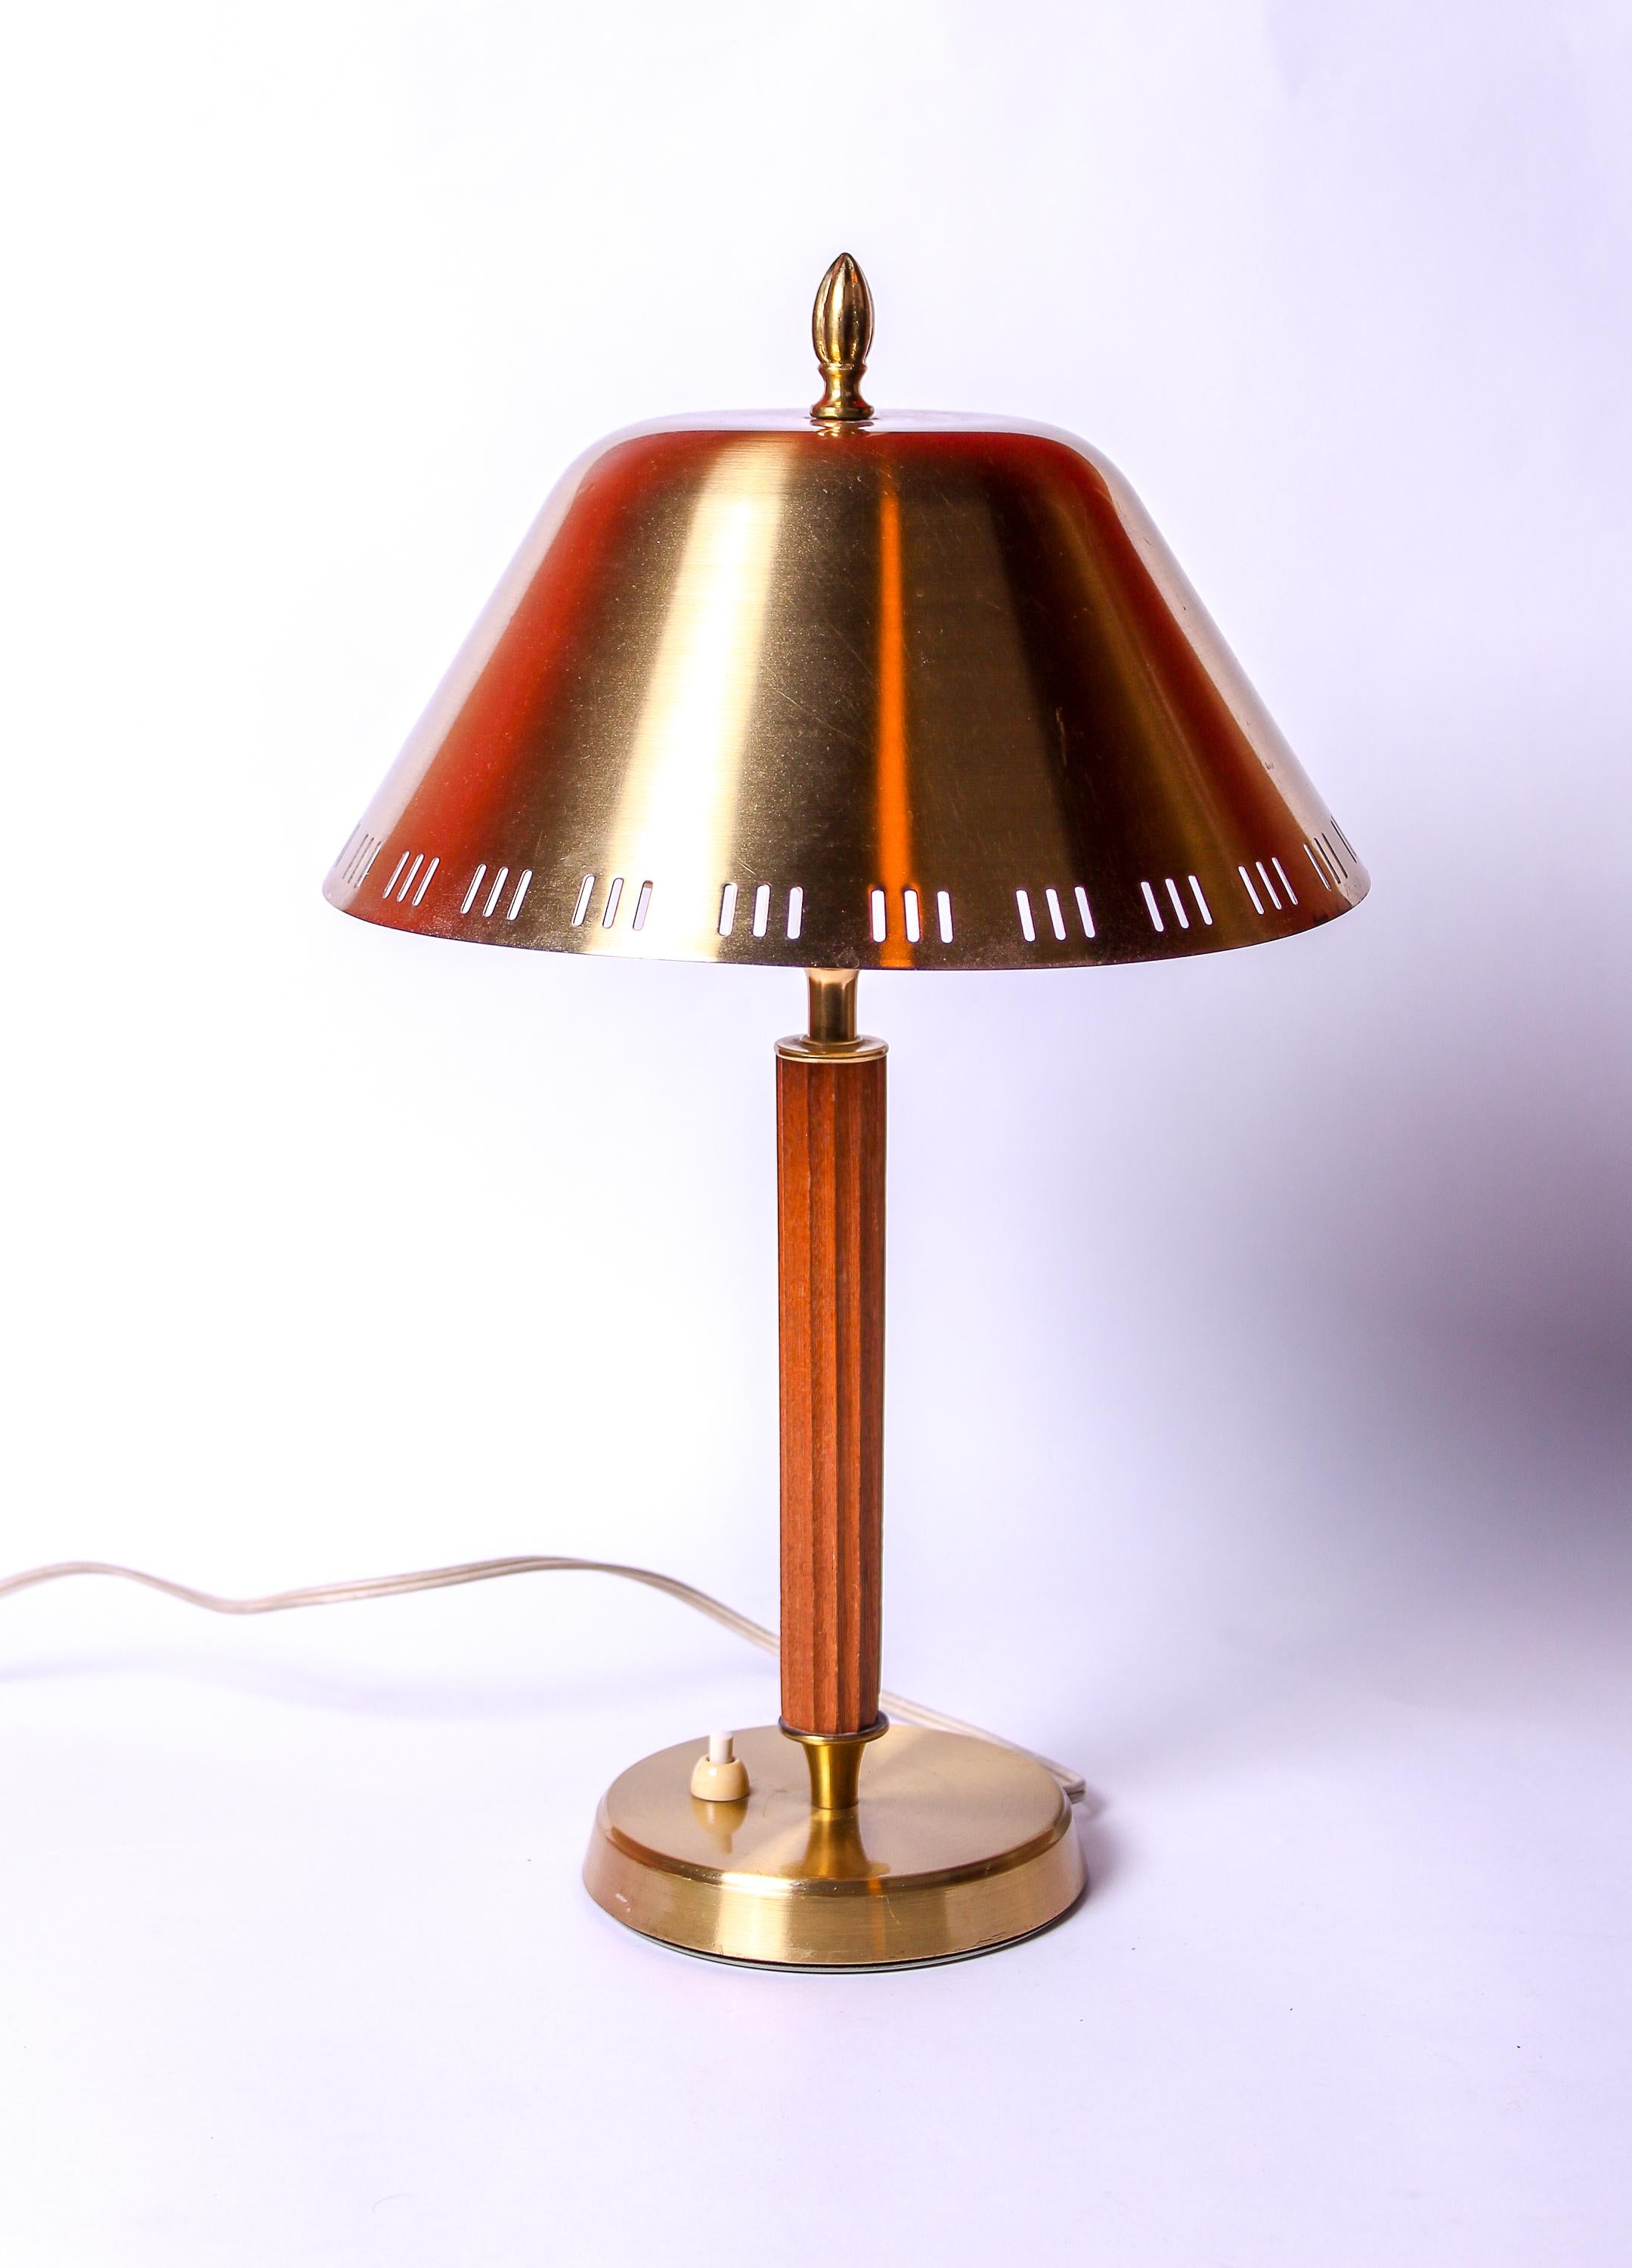 A high quality desk lamp made in Sweden during the 1940s. The lamp is made out of brass and teak and has a perforated shade. It is in good vintage condition and it is fully functional. The shade has some minor bend. Marked FAB. 

The shade can